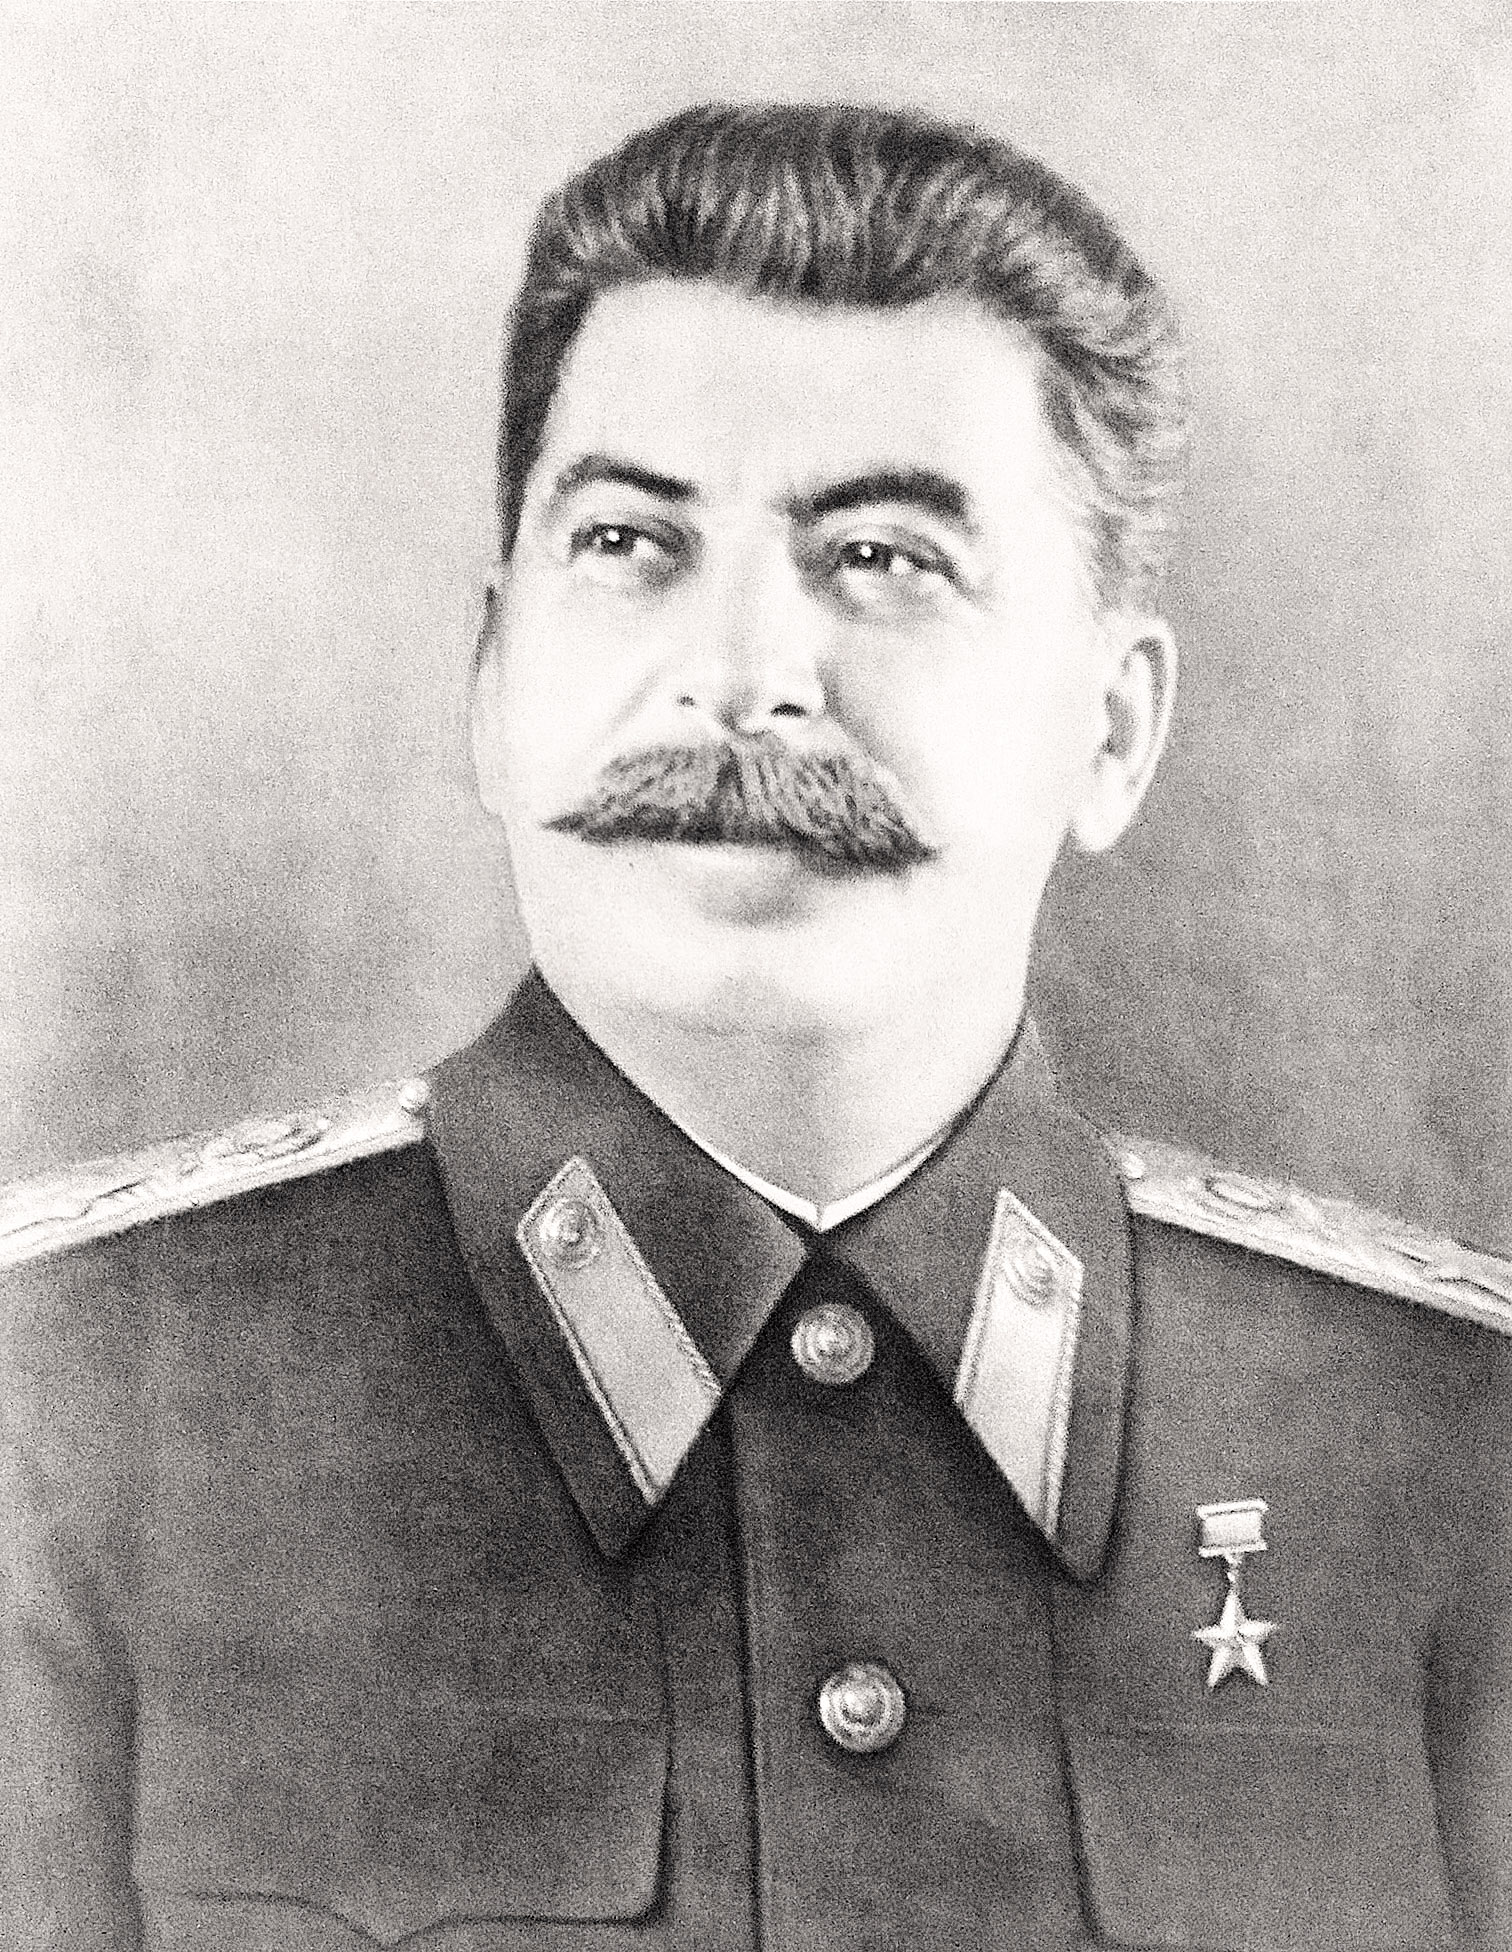 another view on stalin